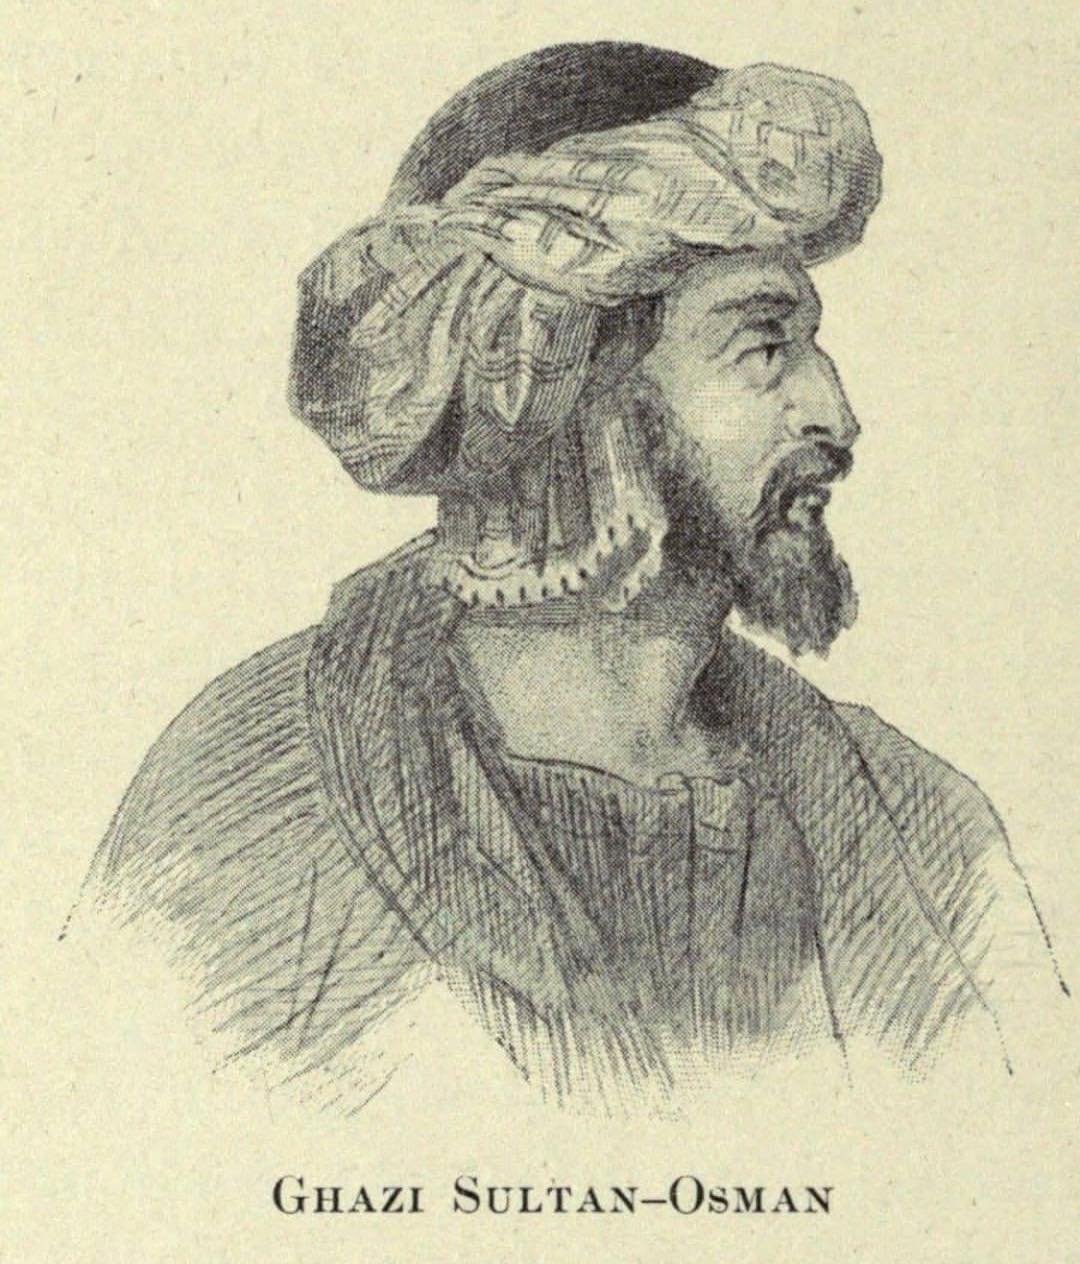 This undated engraving shows Osman Ghazi.